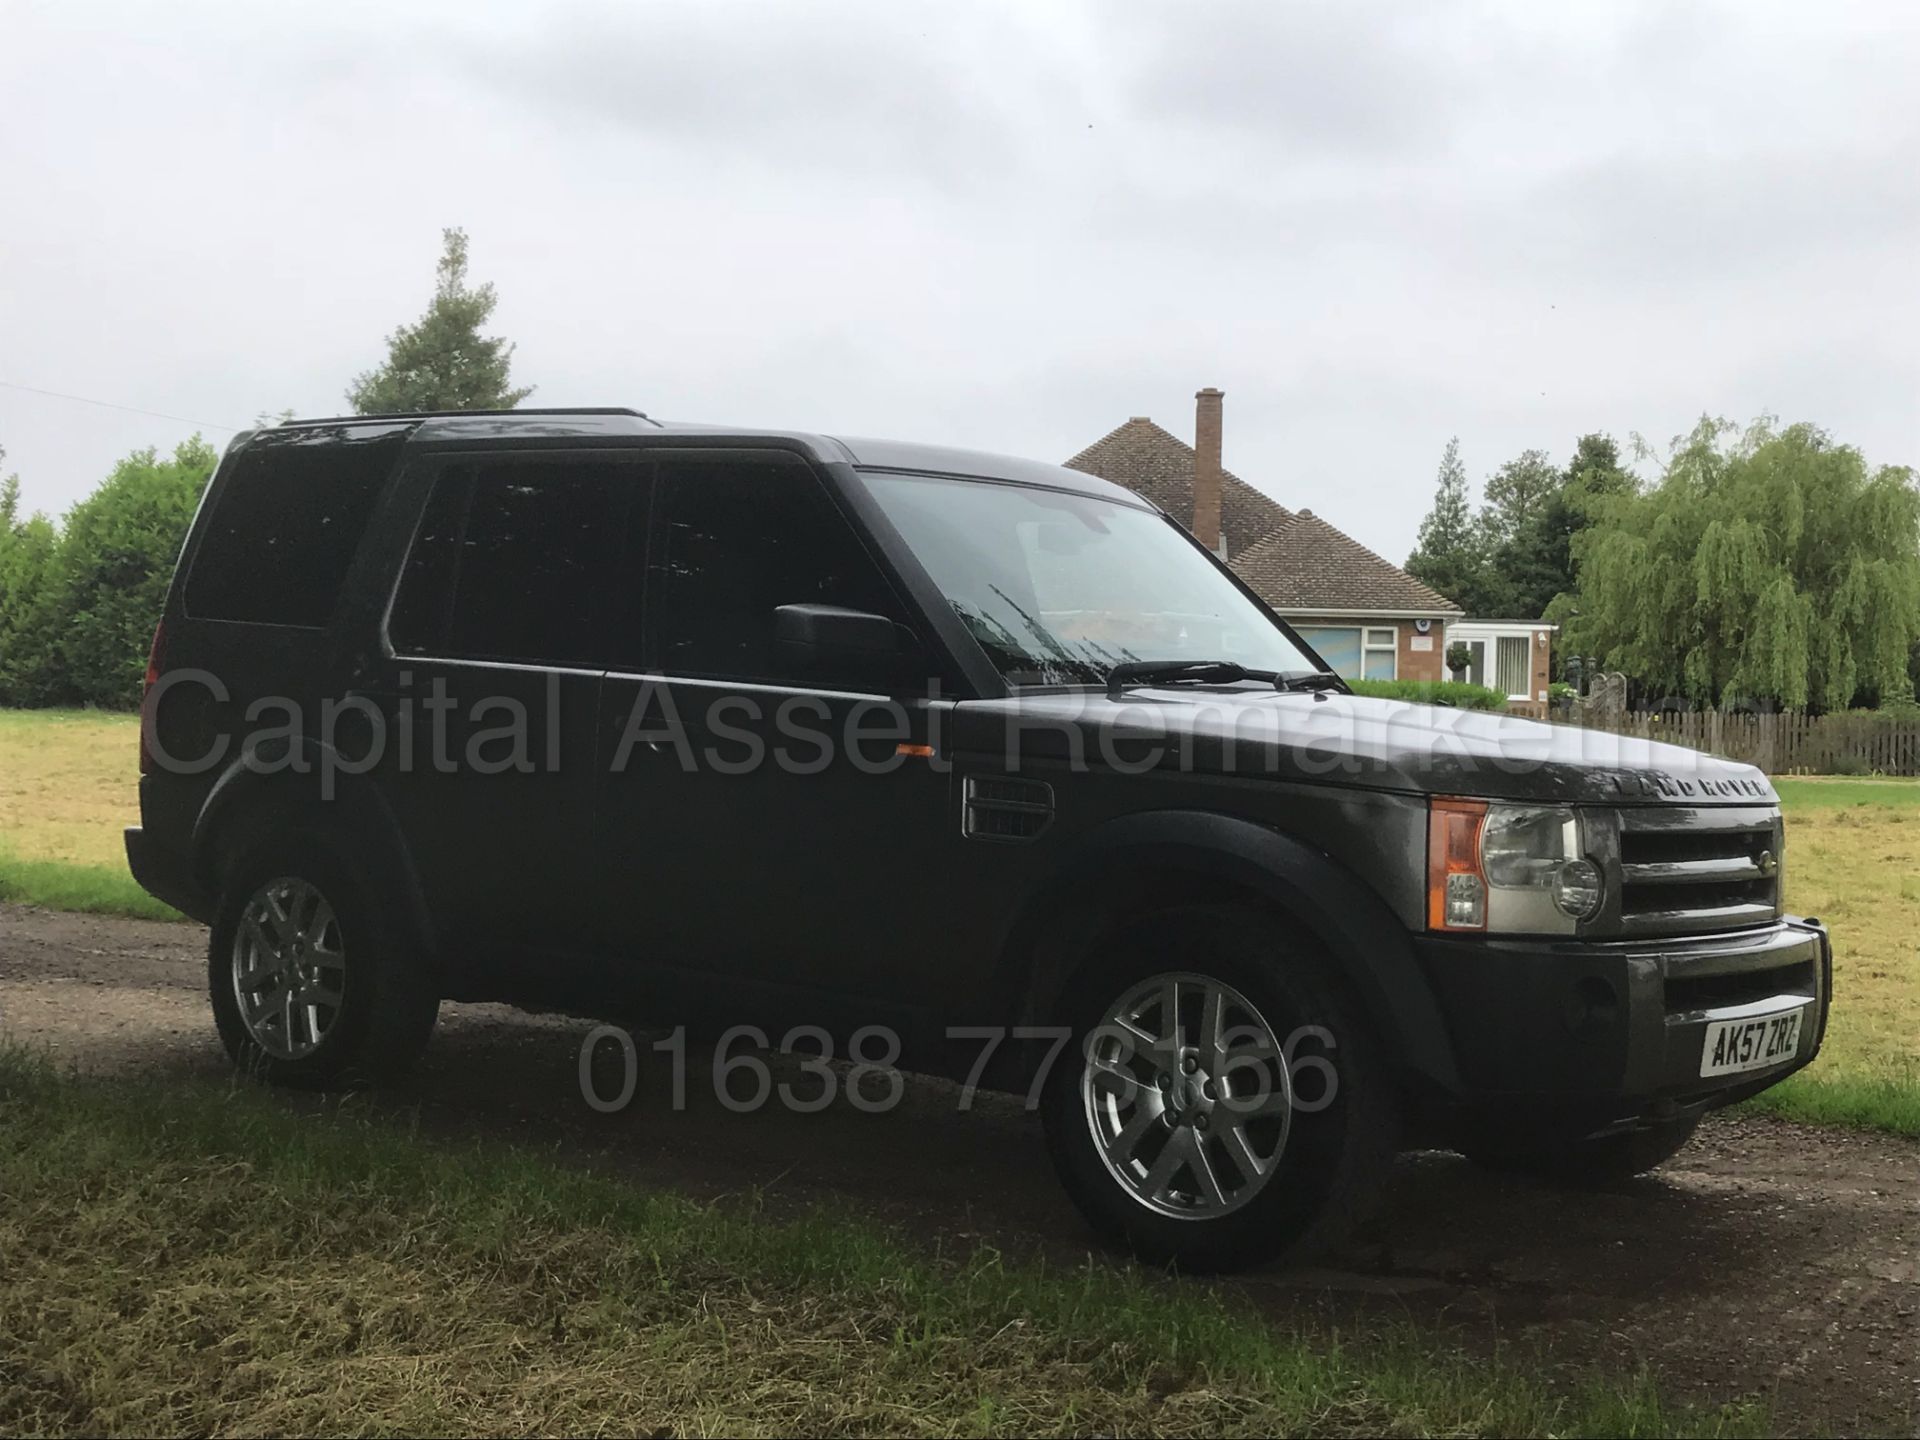 (On Sale) LAND ROVER DISCOVERY 3 'XS EDITION' **COMMERCIAL VAN**(2008 MODEL) 'TDV6-190 BHP' (NO VAT)